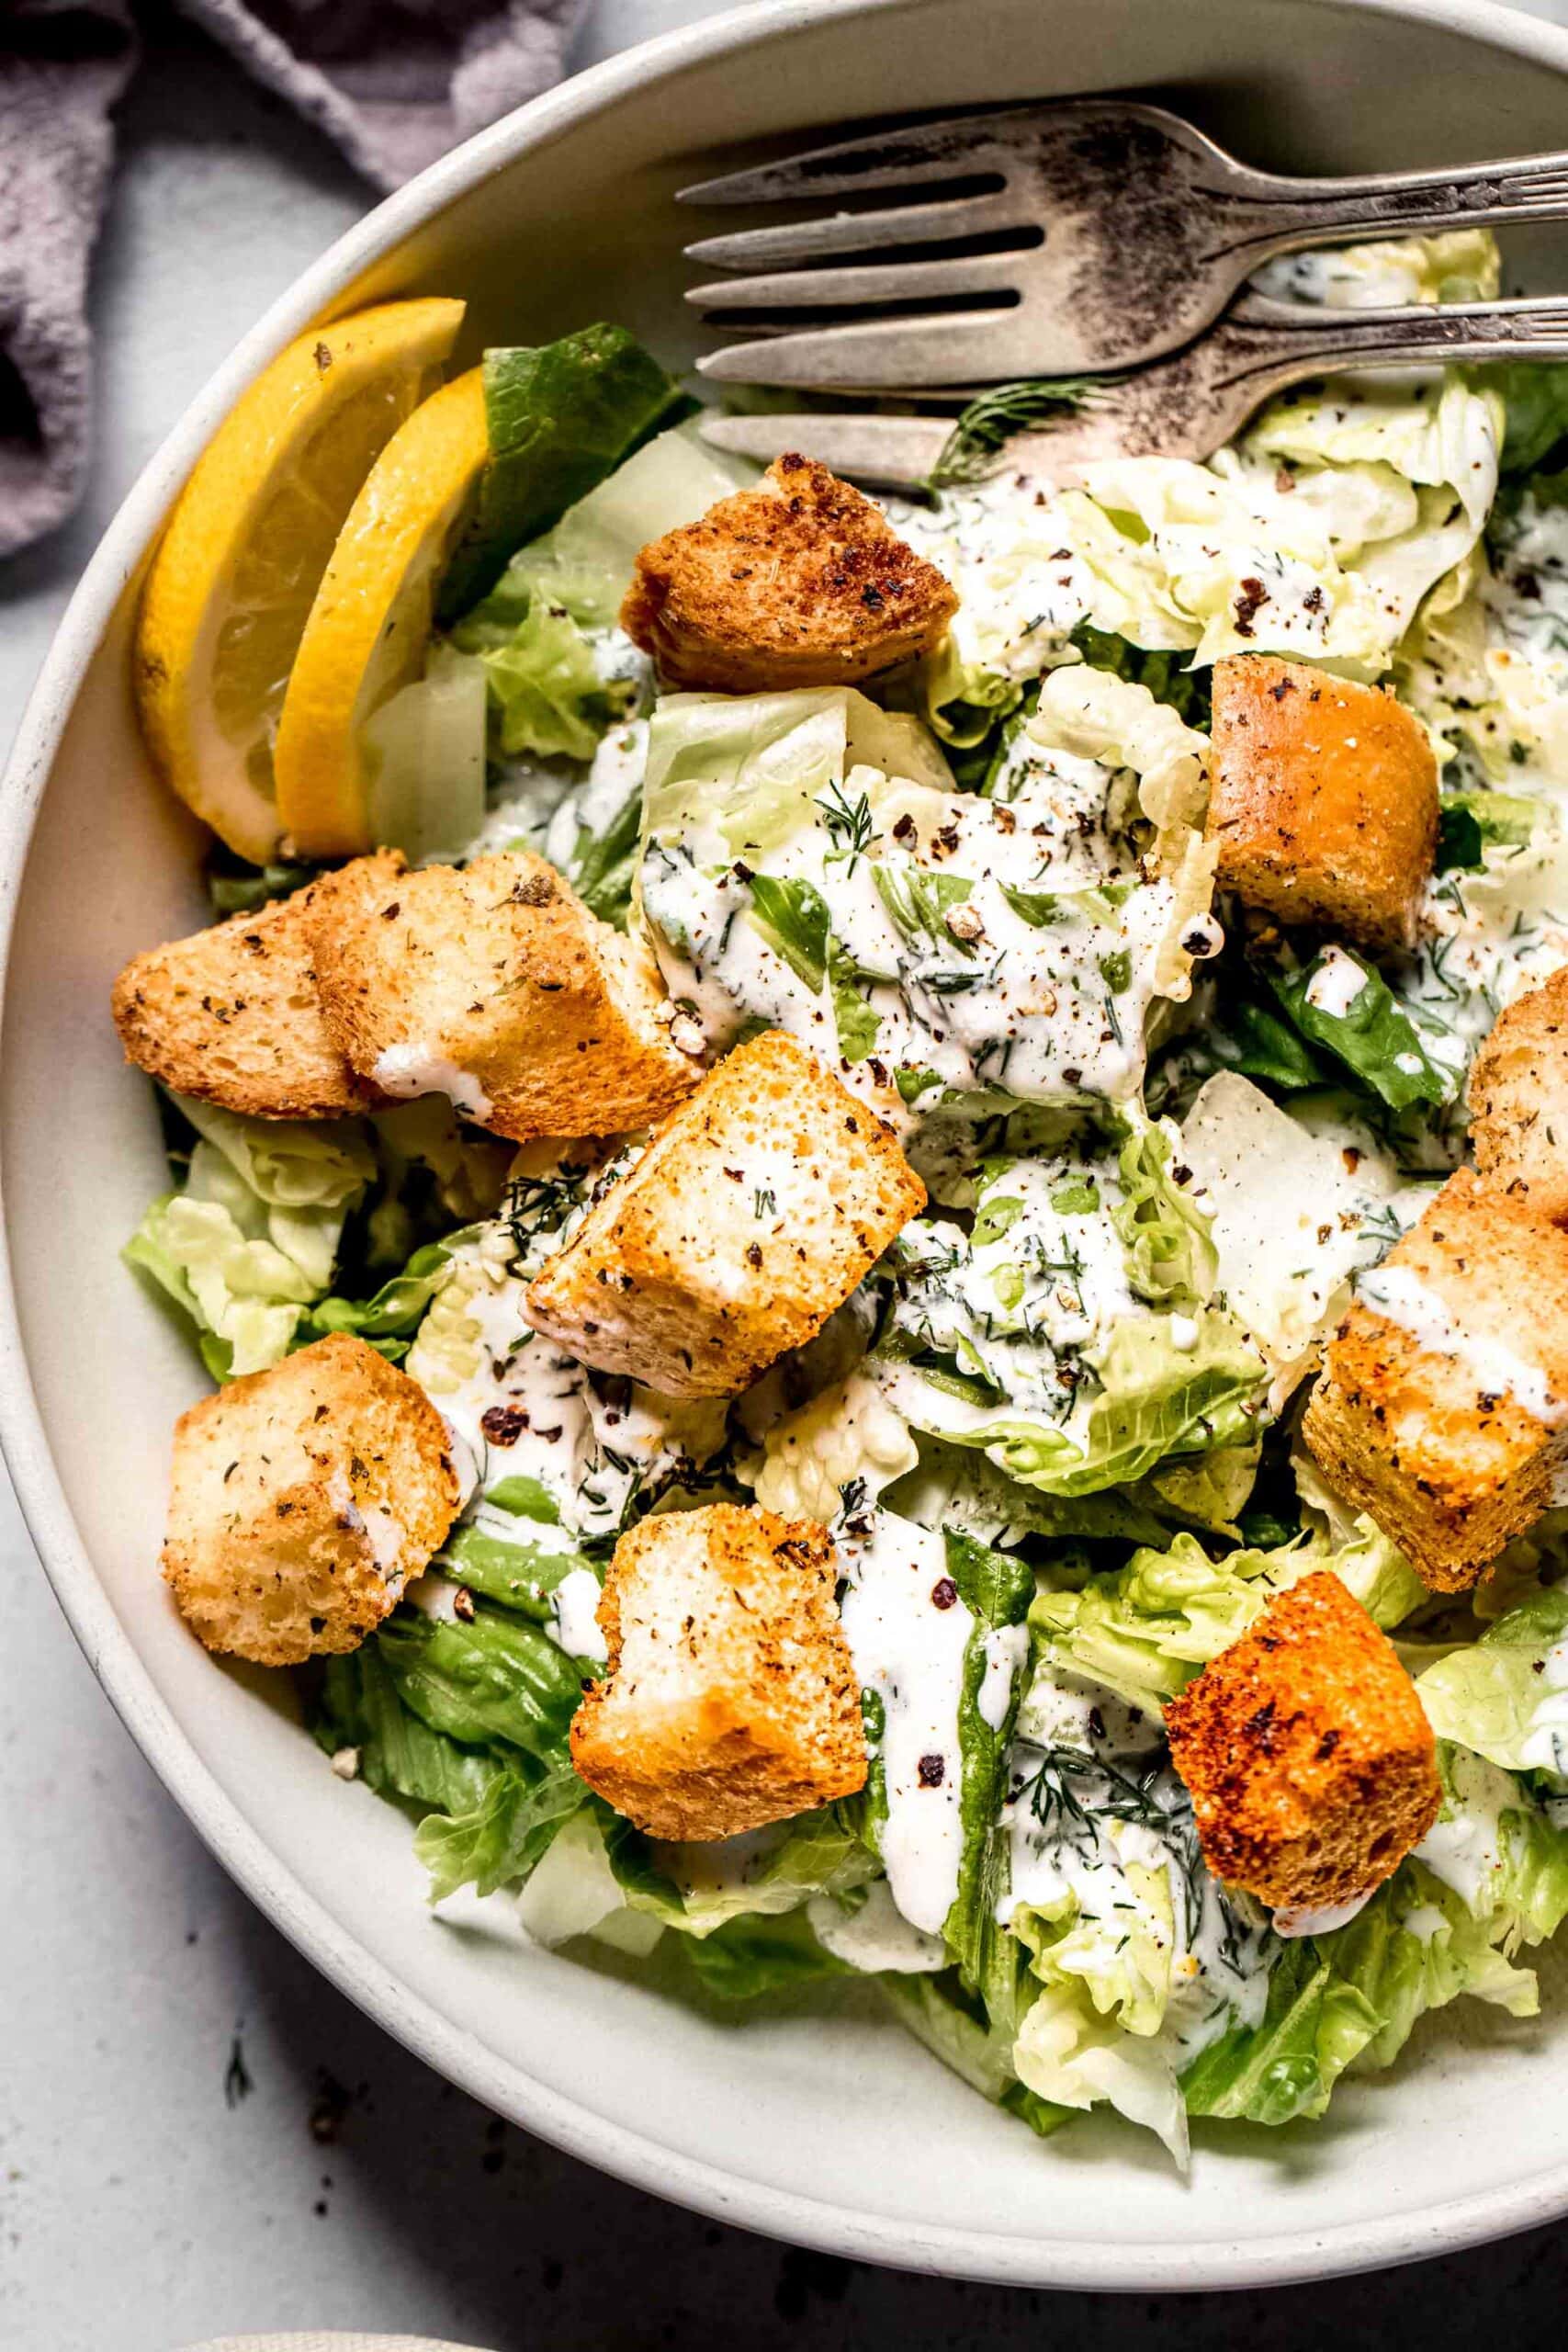 Green salad with croutons drizzled with greek yogurt salad dressing.